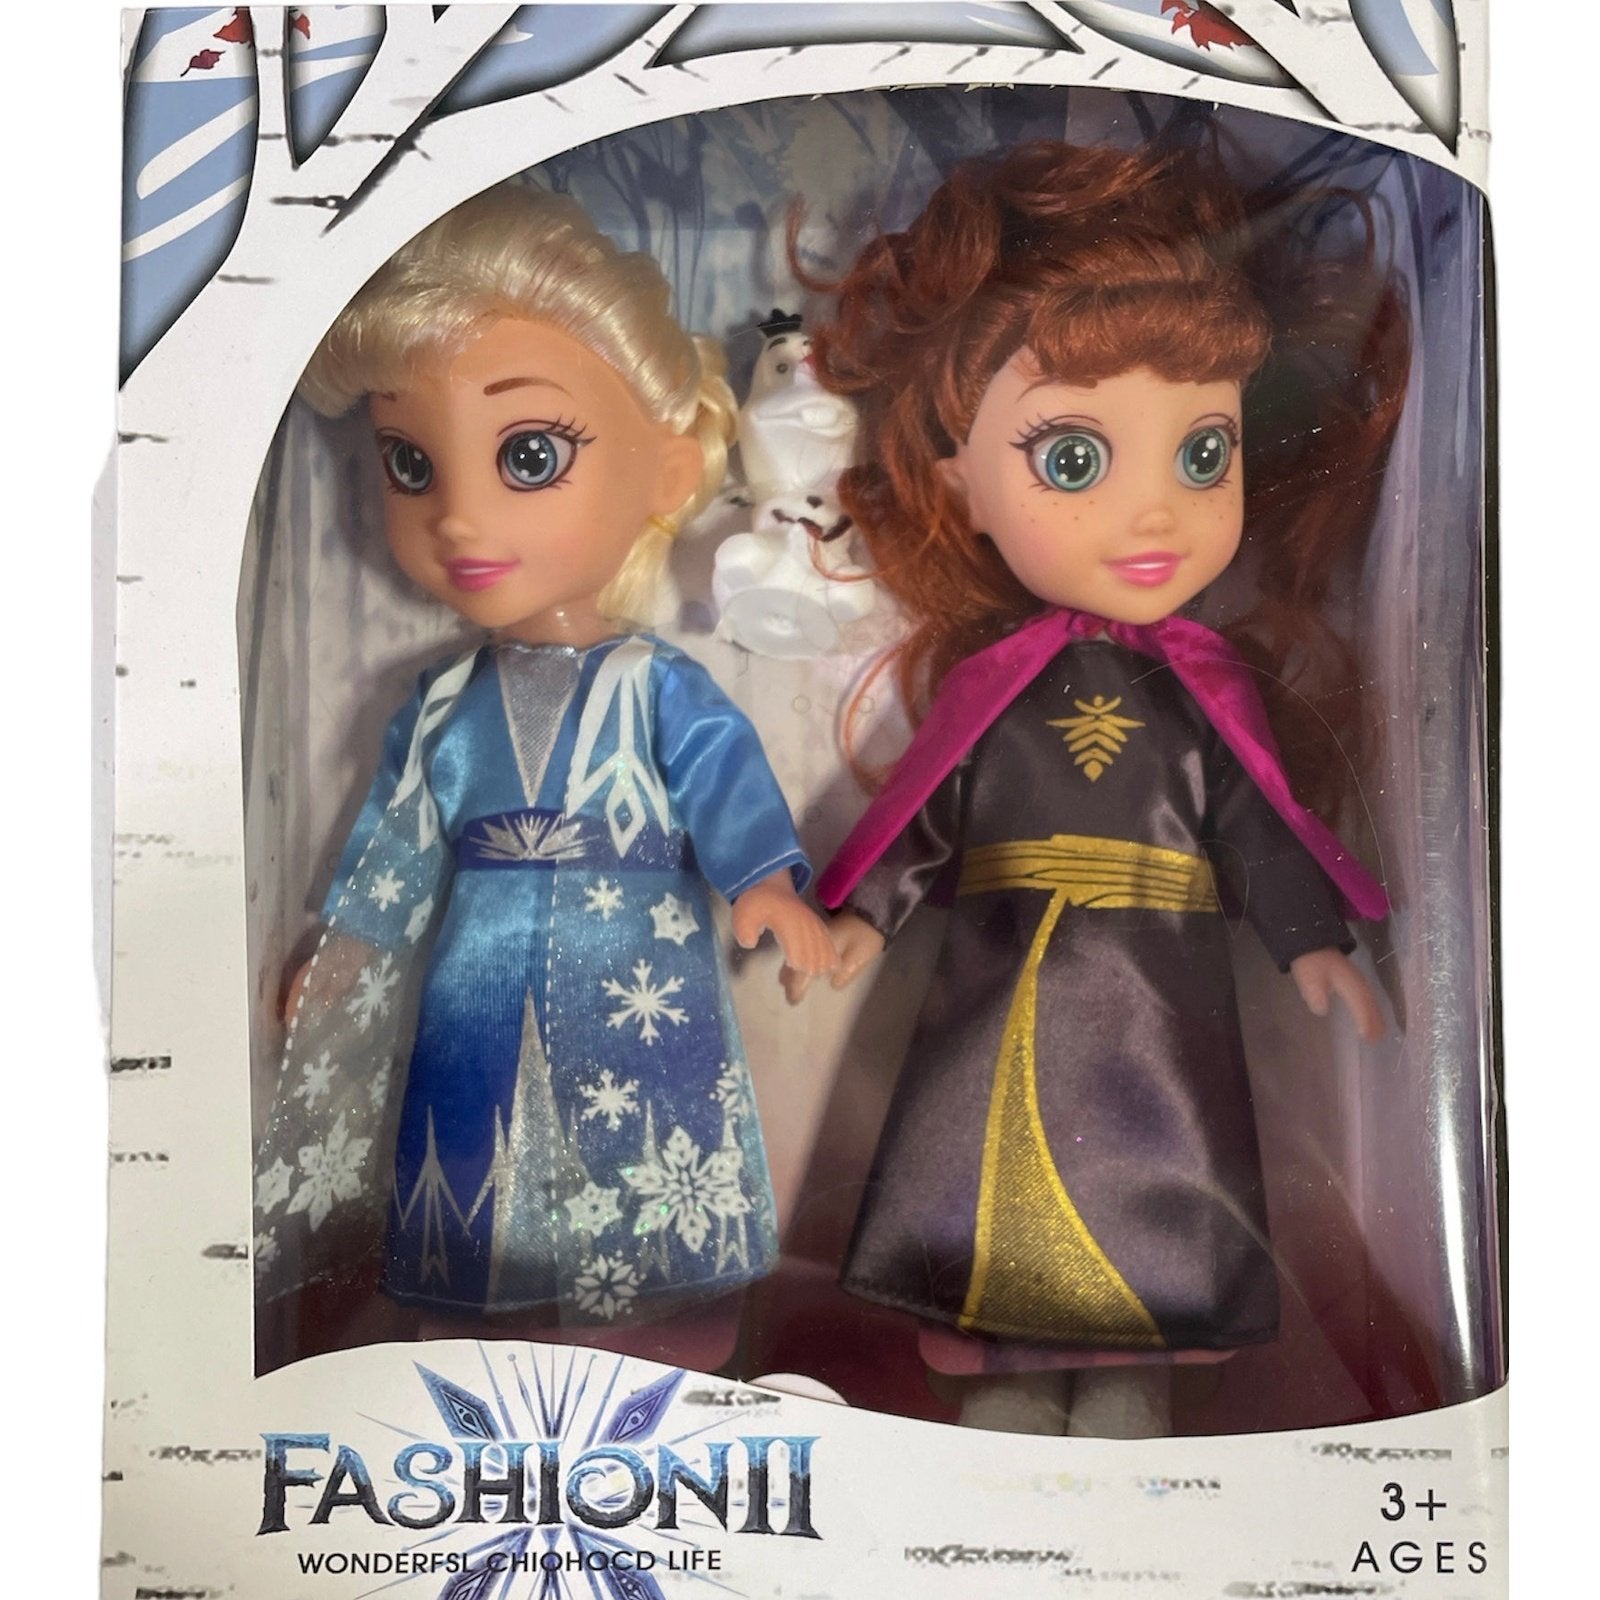 Frozen Happy Together  Elsa and Anna Fashion Doll Gifts for Kids H26 - kidzbuzzz